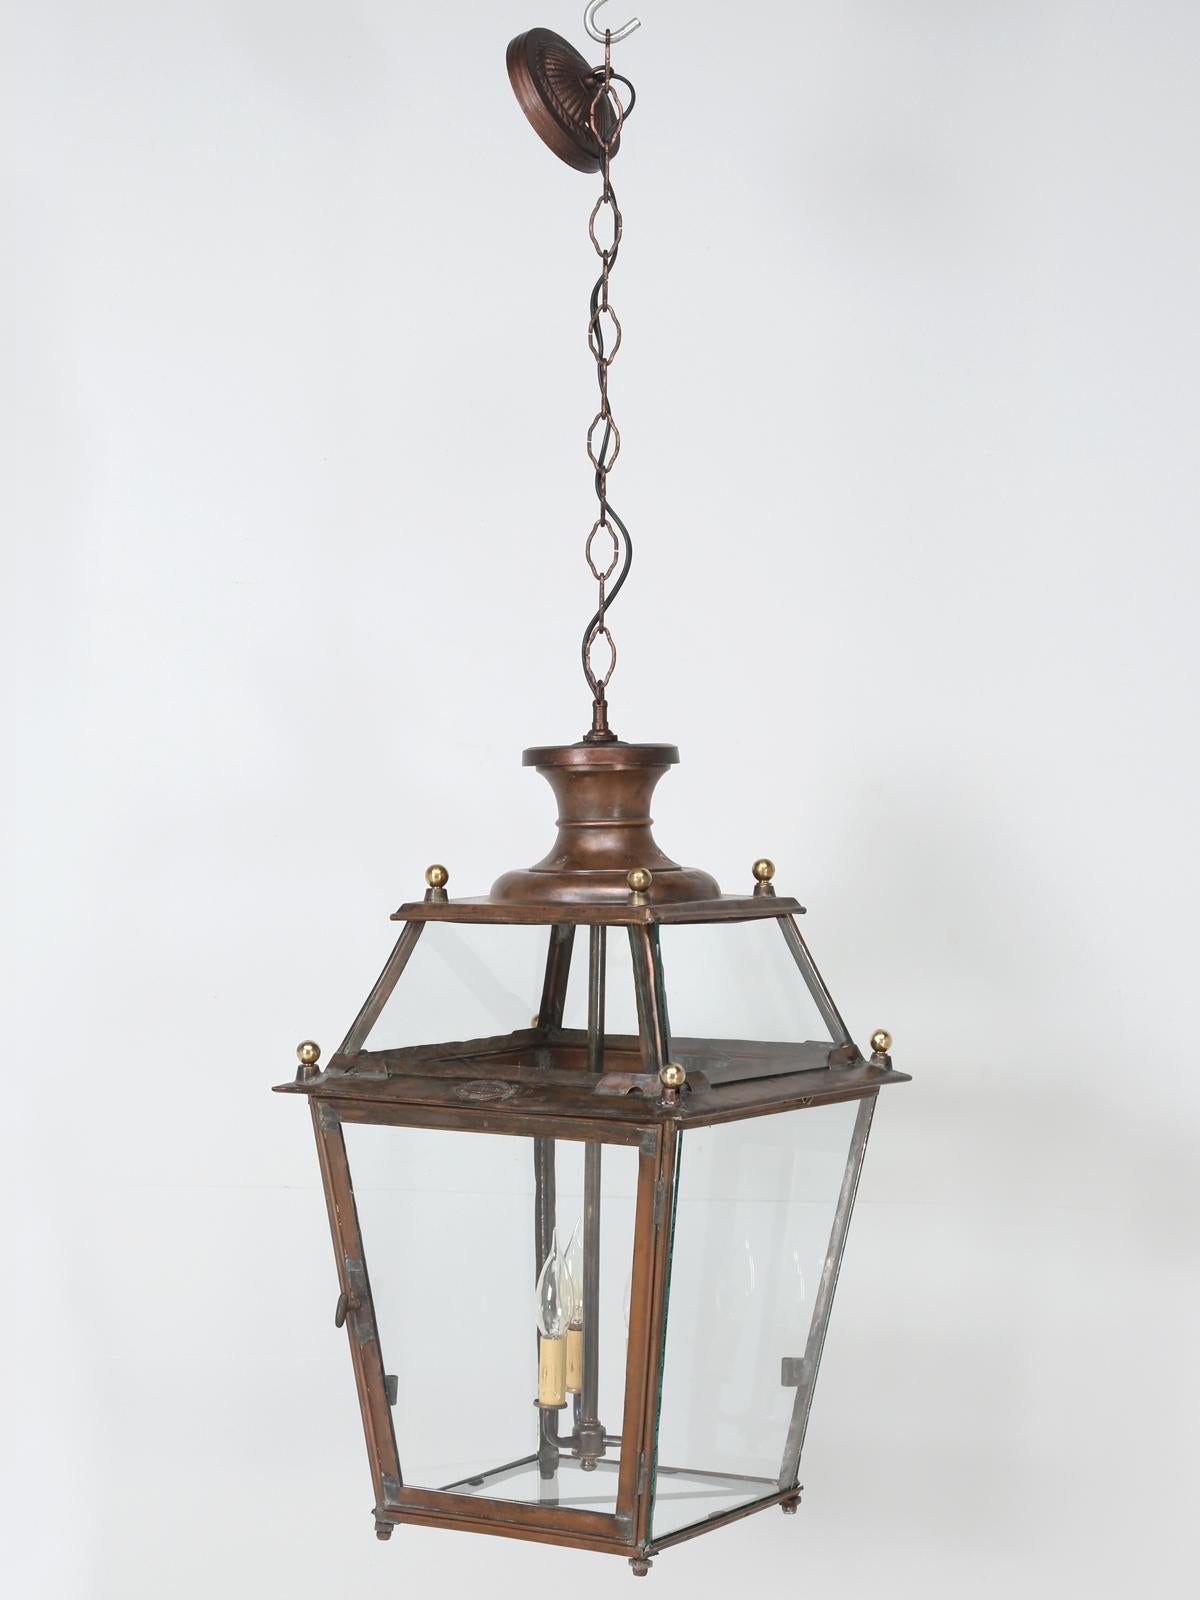 Antique French copper lantern, manufactured by Leon Luchairl, whose shop was located at 27 rue Érard a’ Paris. Our old plank electrical department, completely rebuilt this antique French copper lantern, with all new wiring and American specification